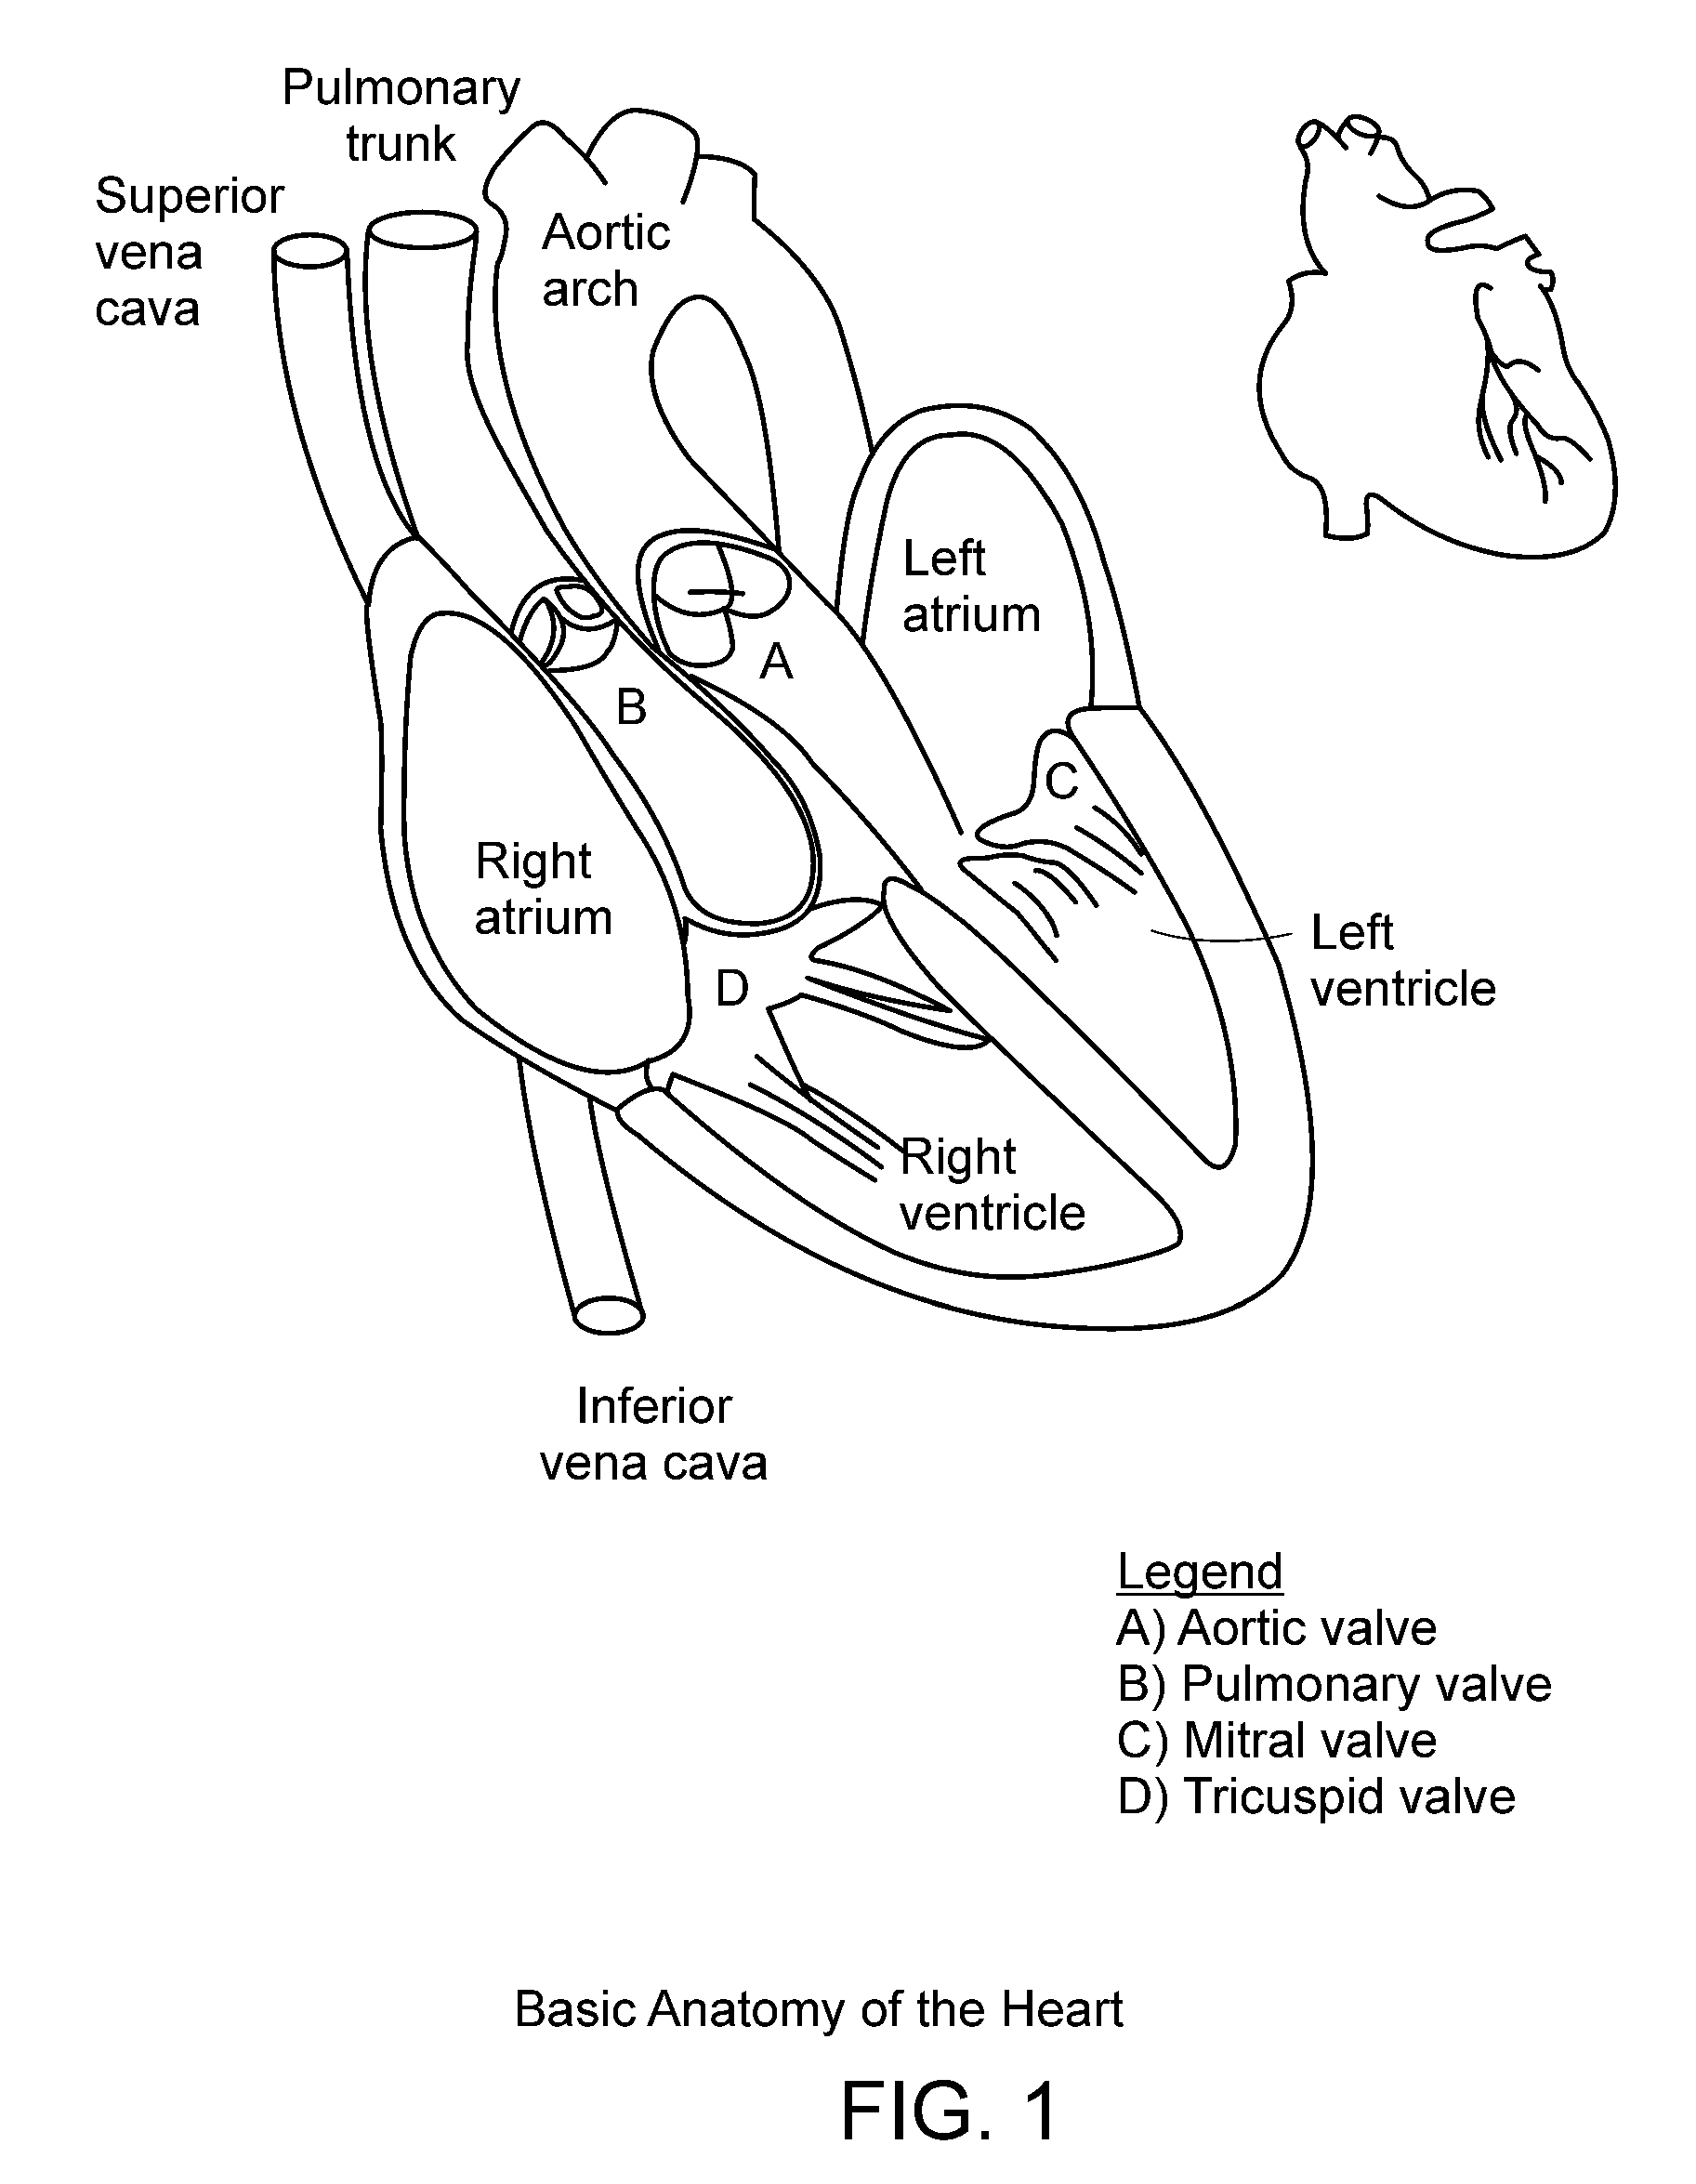 Transcatheter Delivery of a Replacement Heart Valve